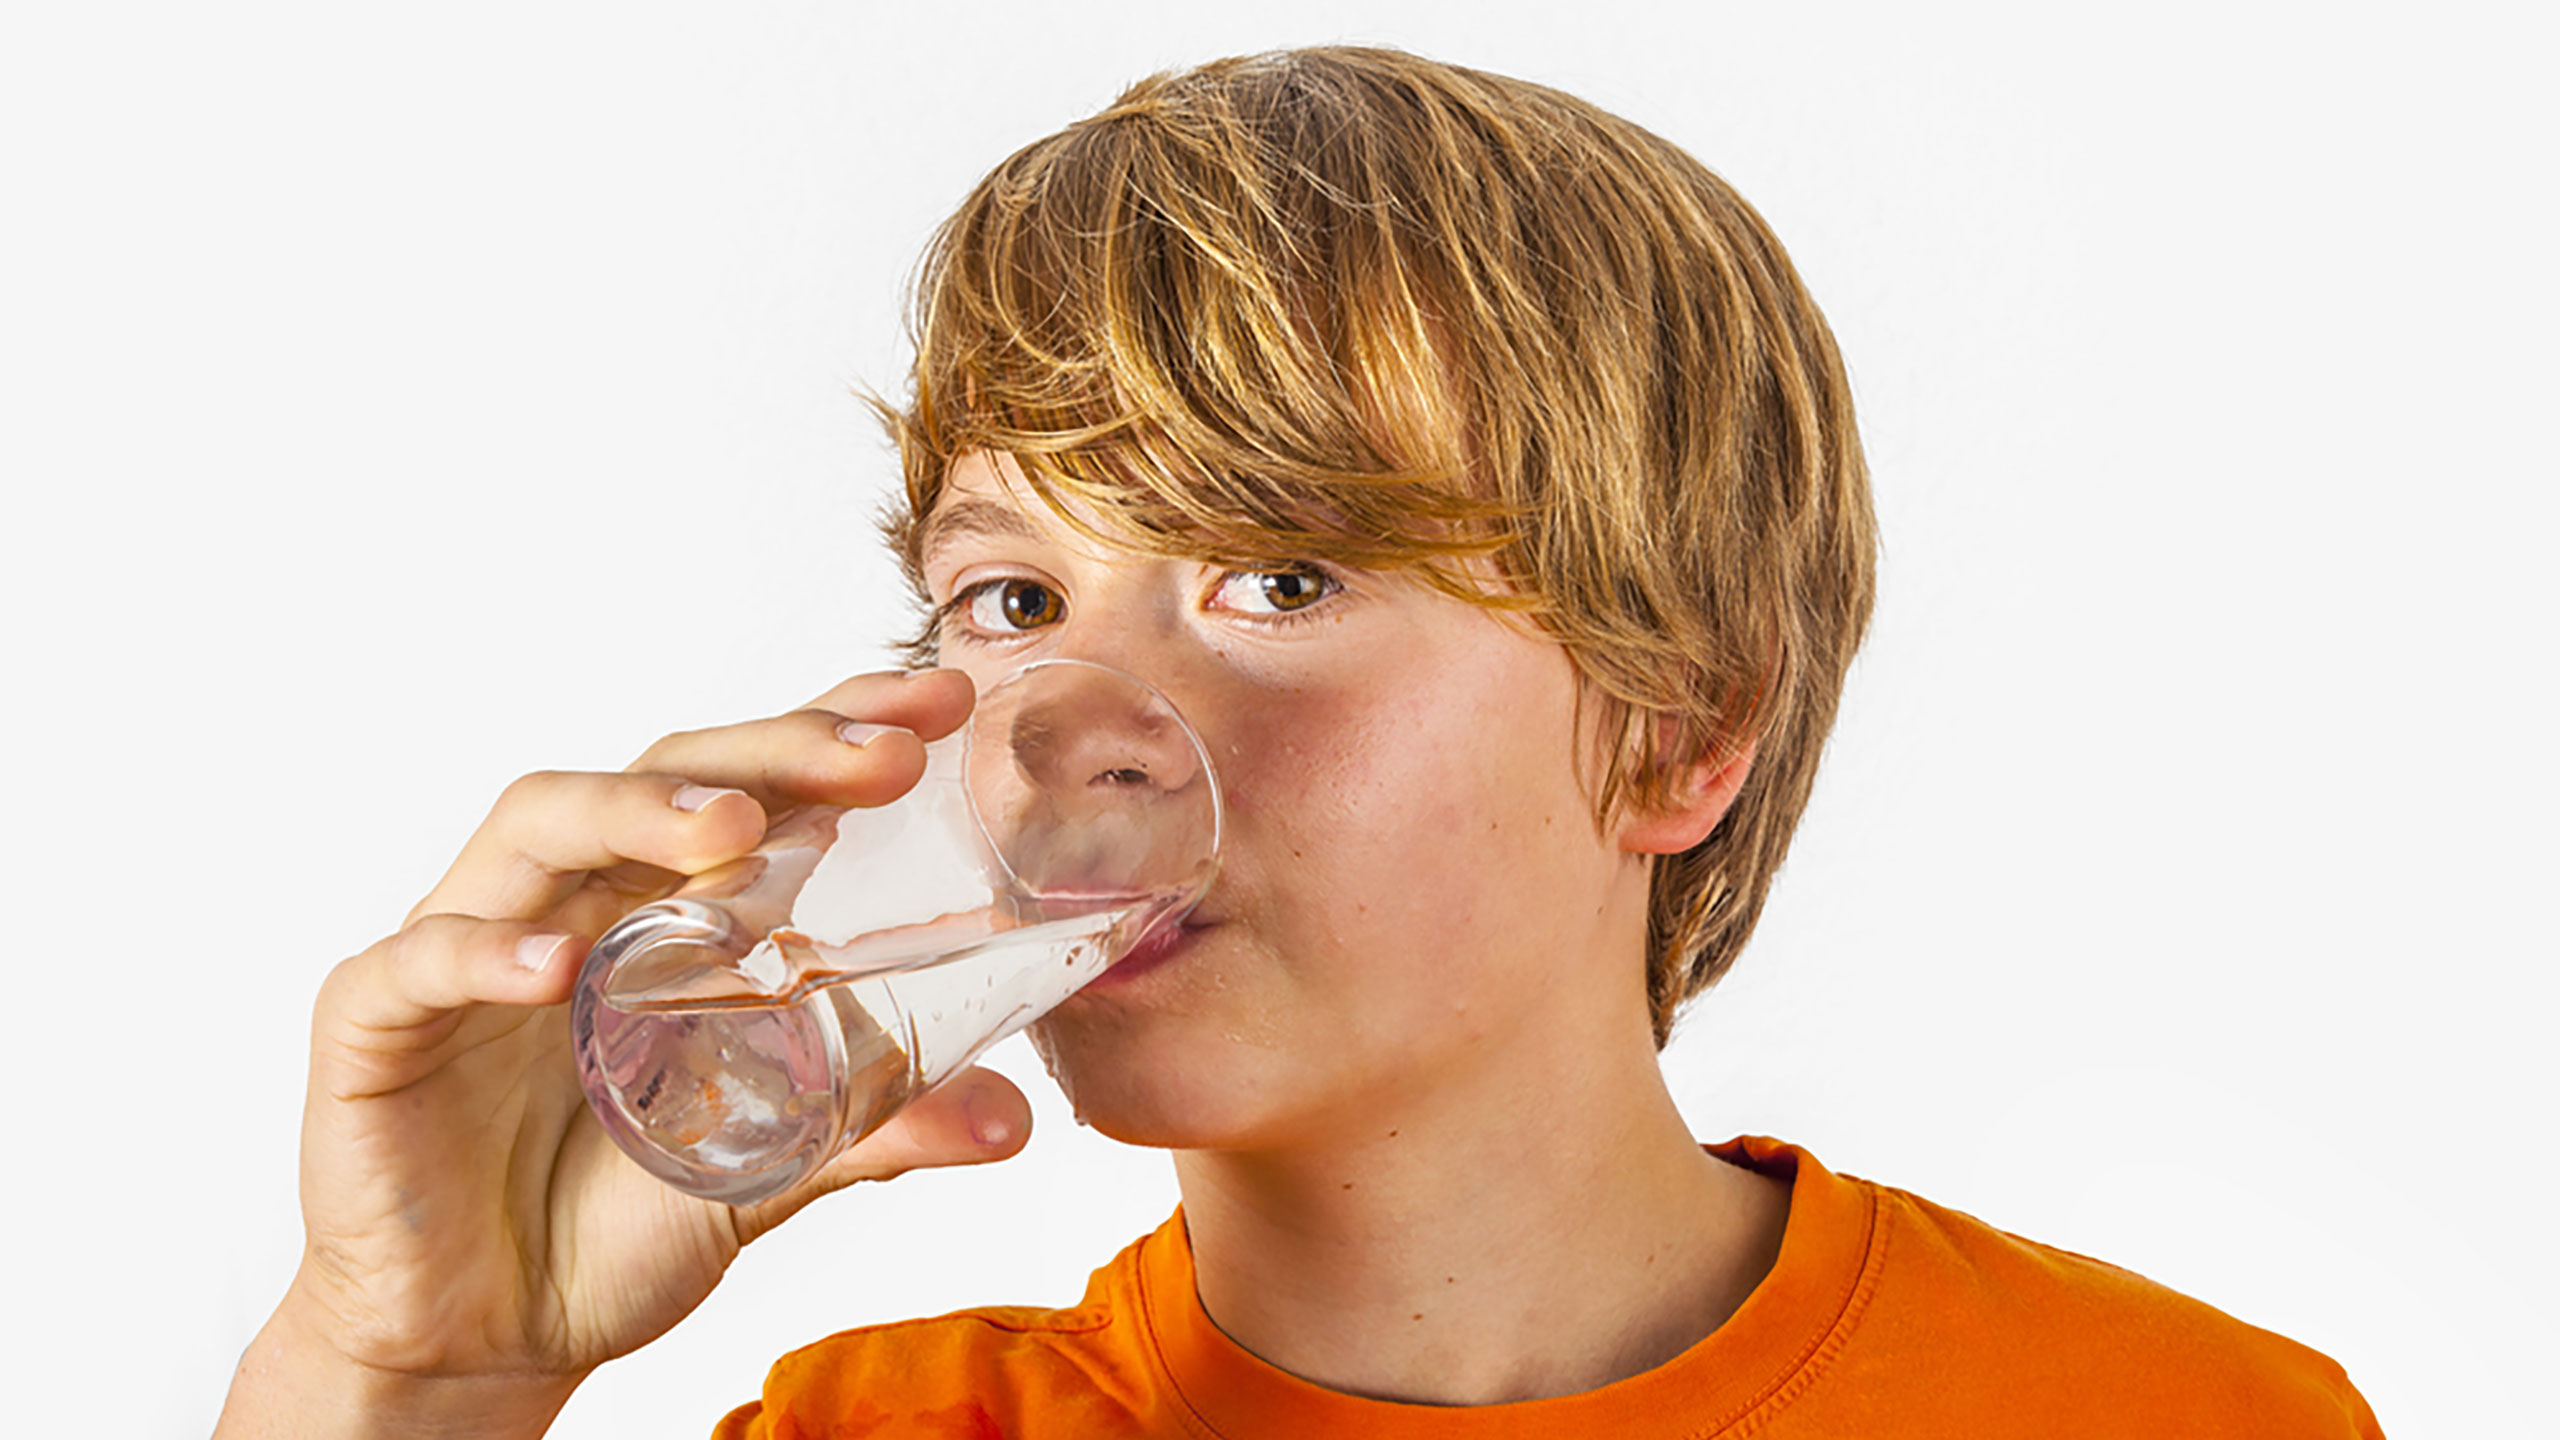 Boy hydrating with glass of water